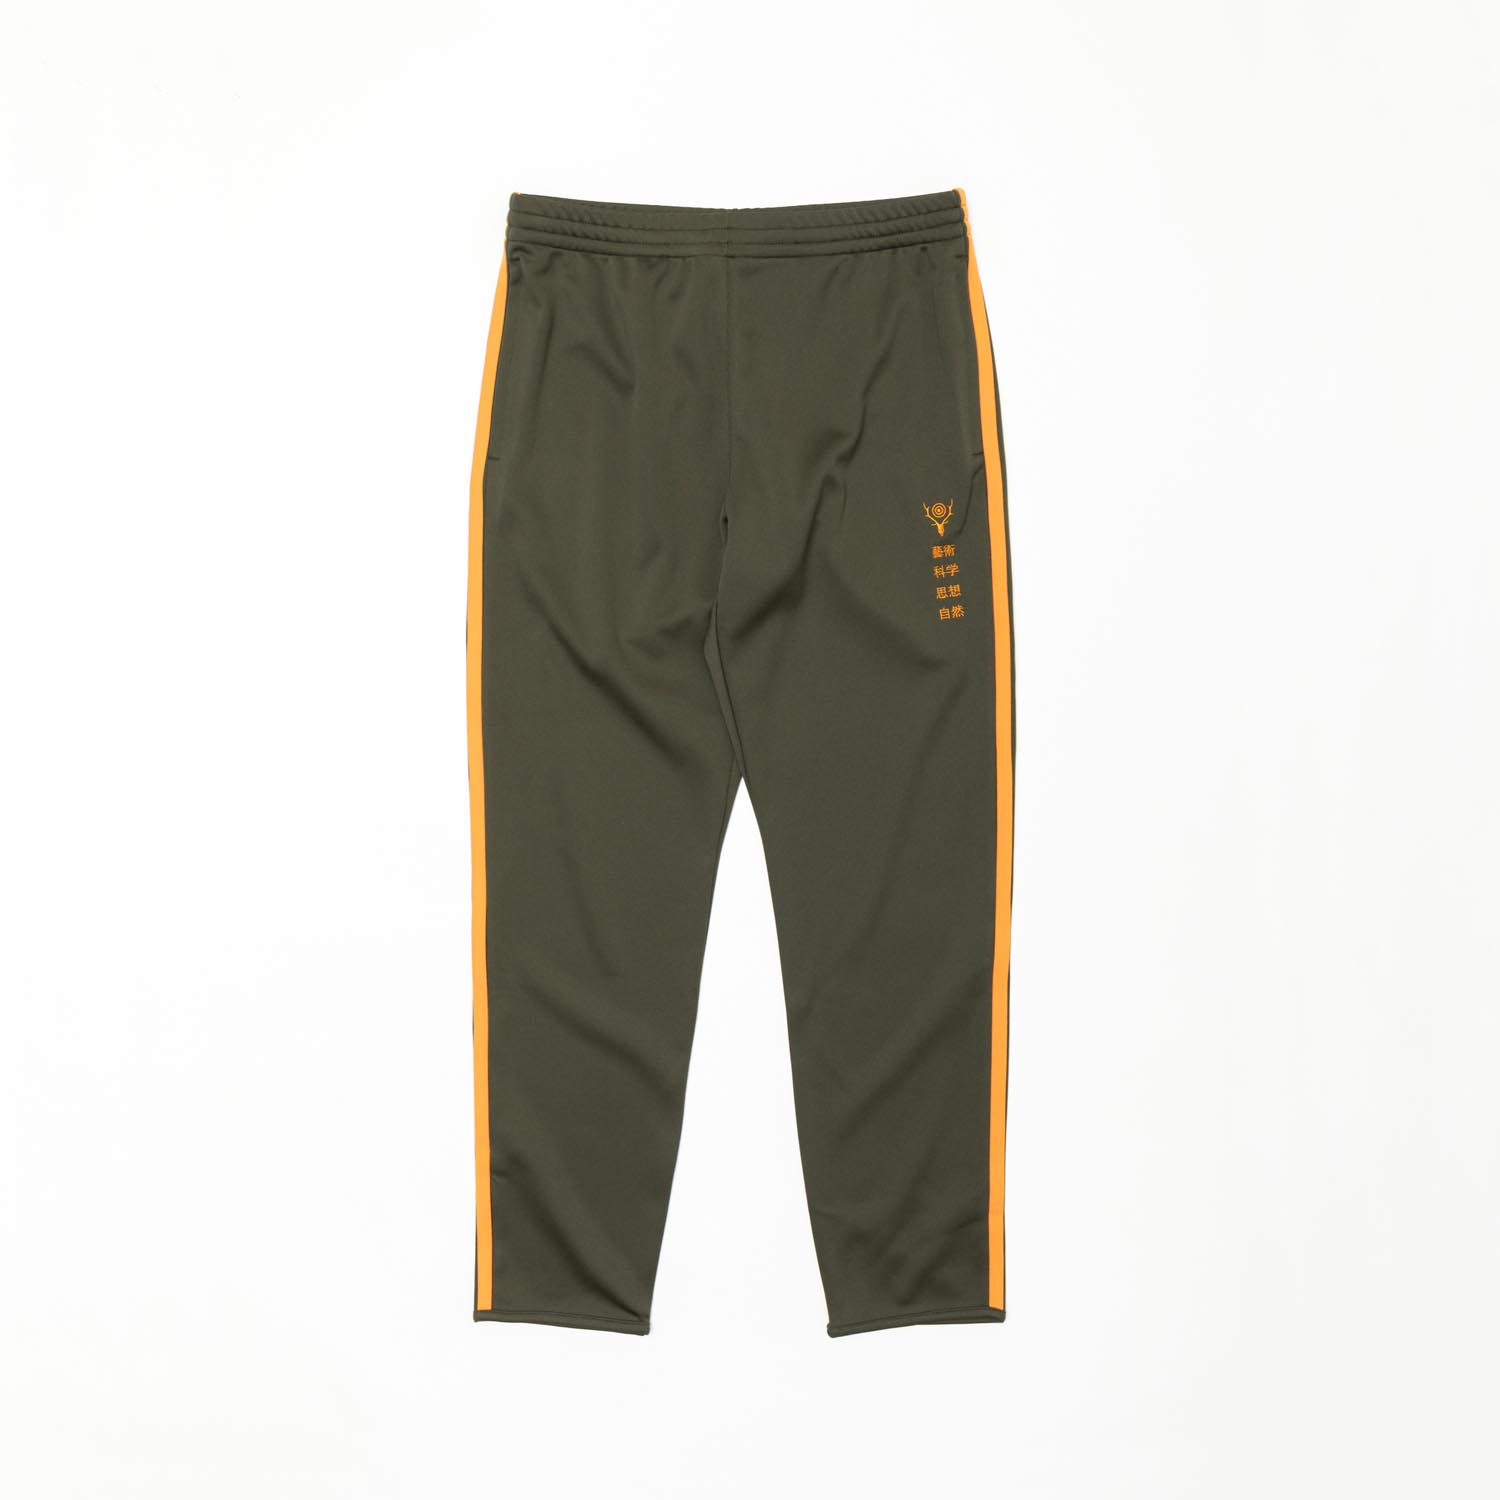 SOUTH2 WEST8 x TACOMA FUJI RECORDS Trainer Pant – Poly Smooth